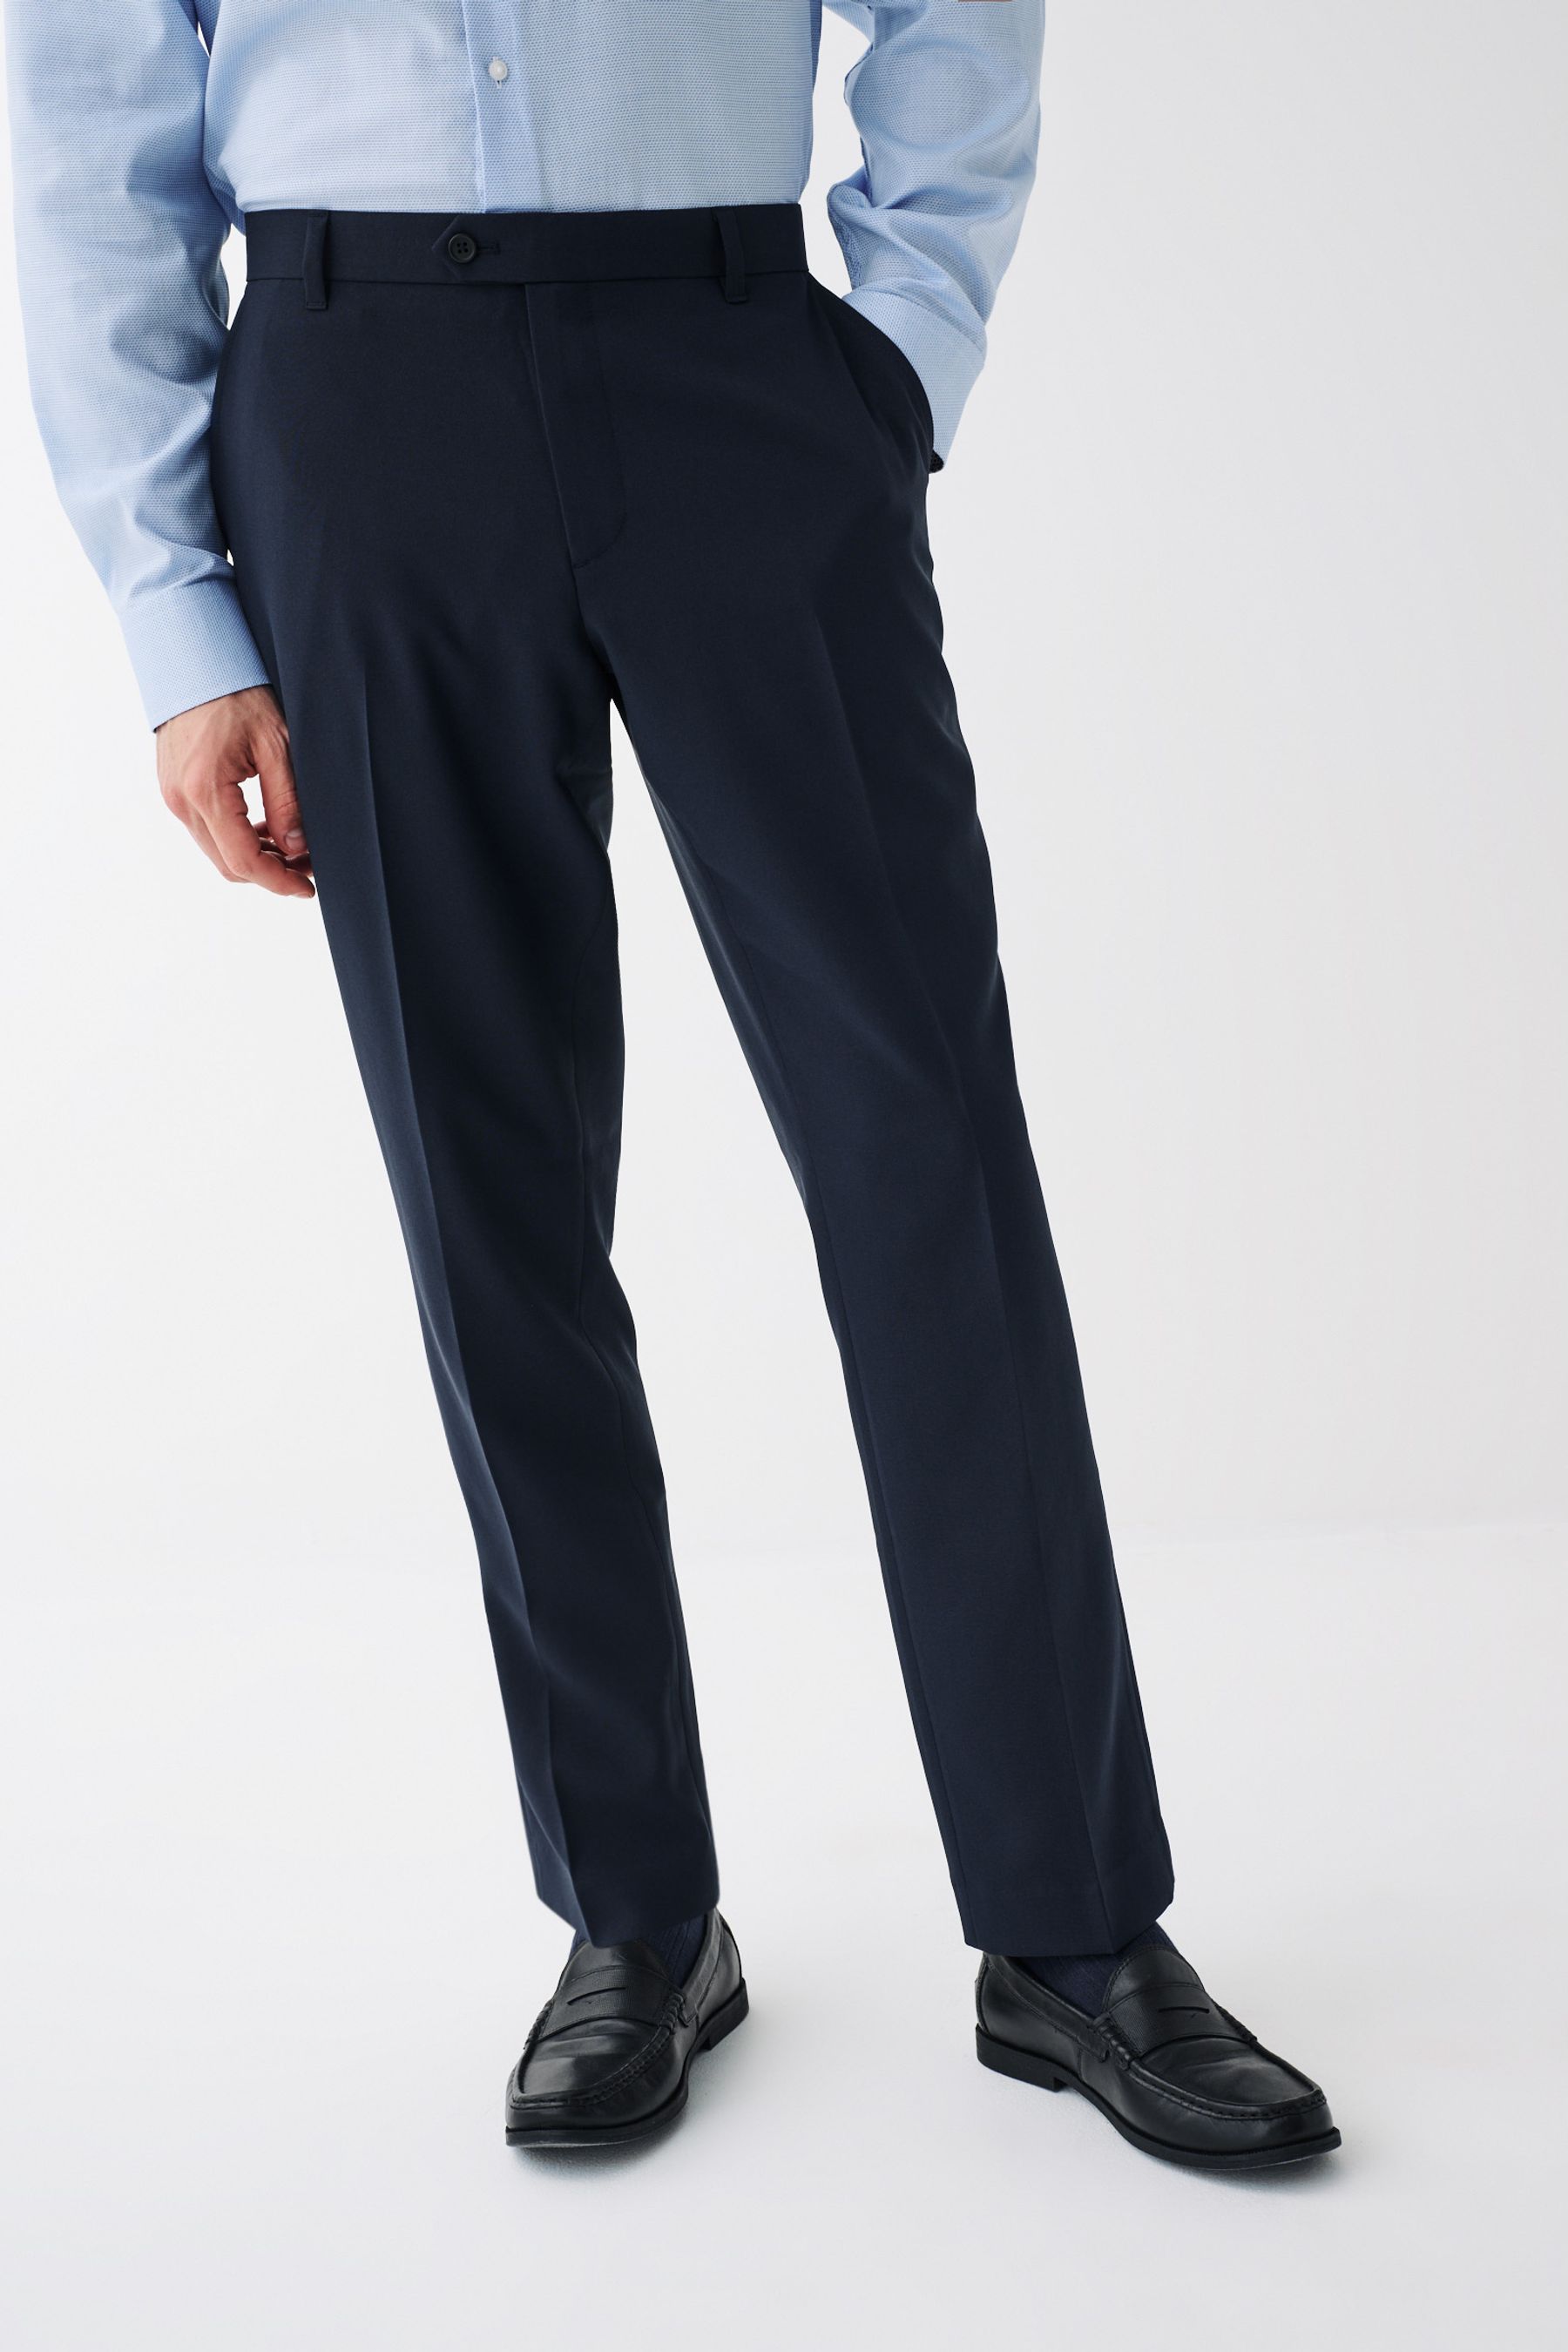 Buy Navy Blue Tailored Machine Washable Plain Front Smart Trousers from ...